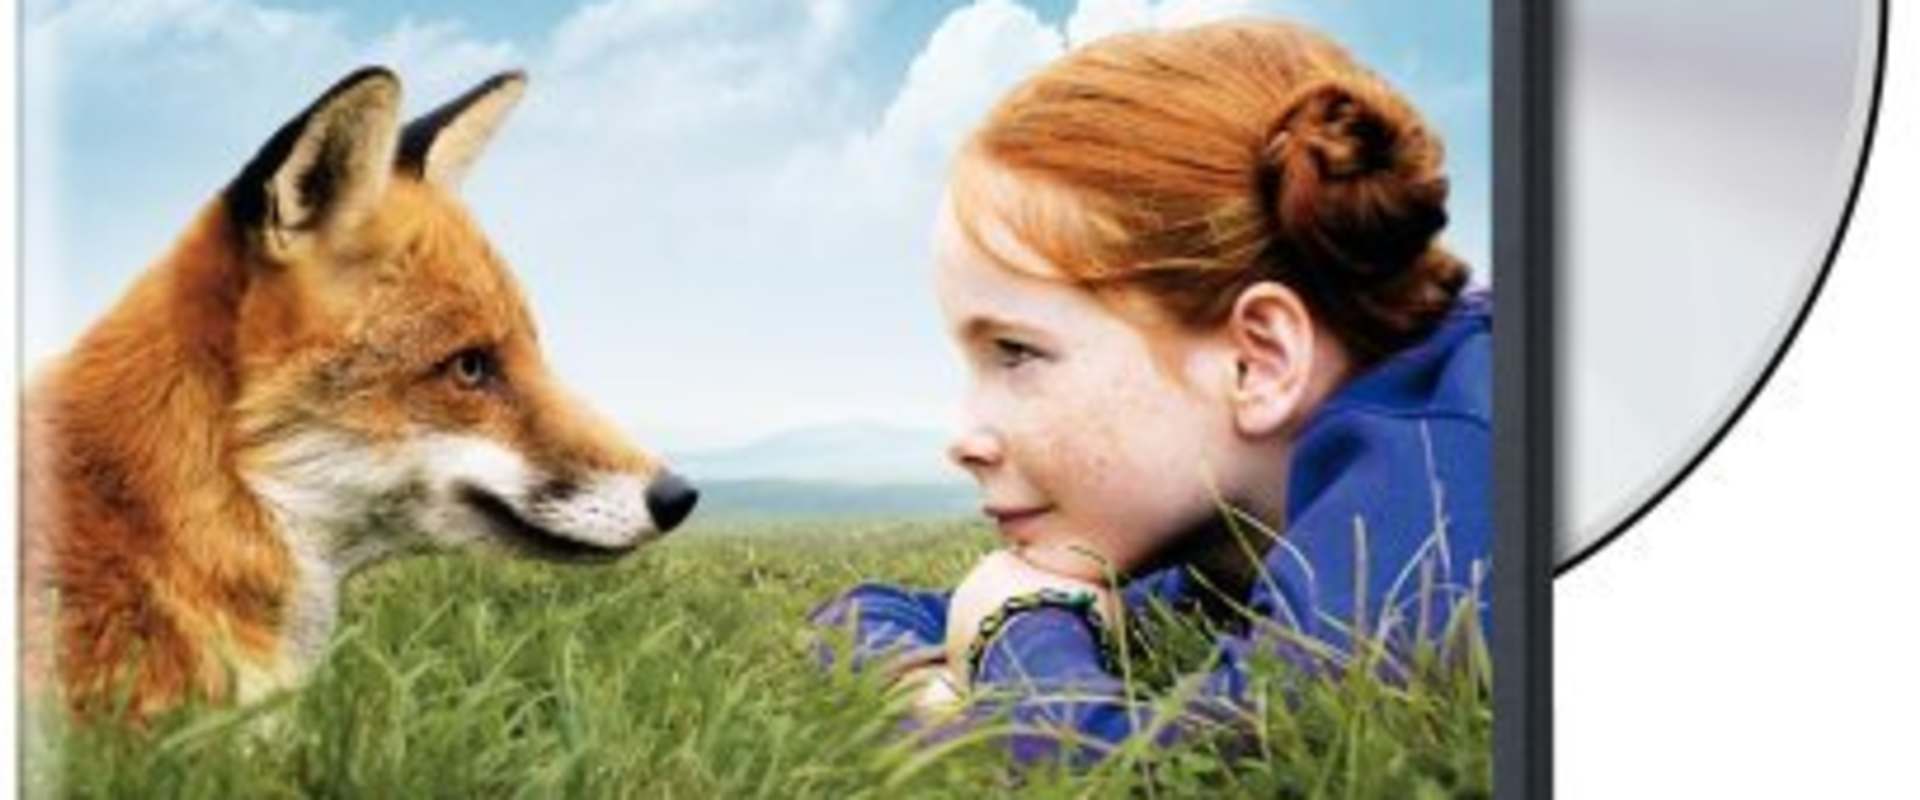 The Fox and the Child background 1